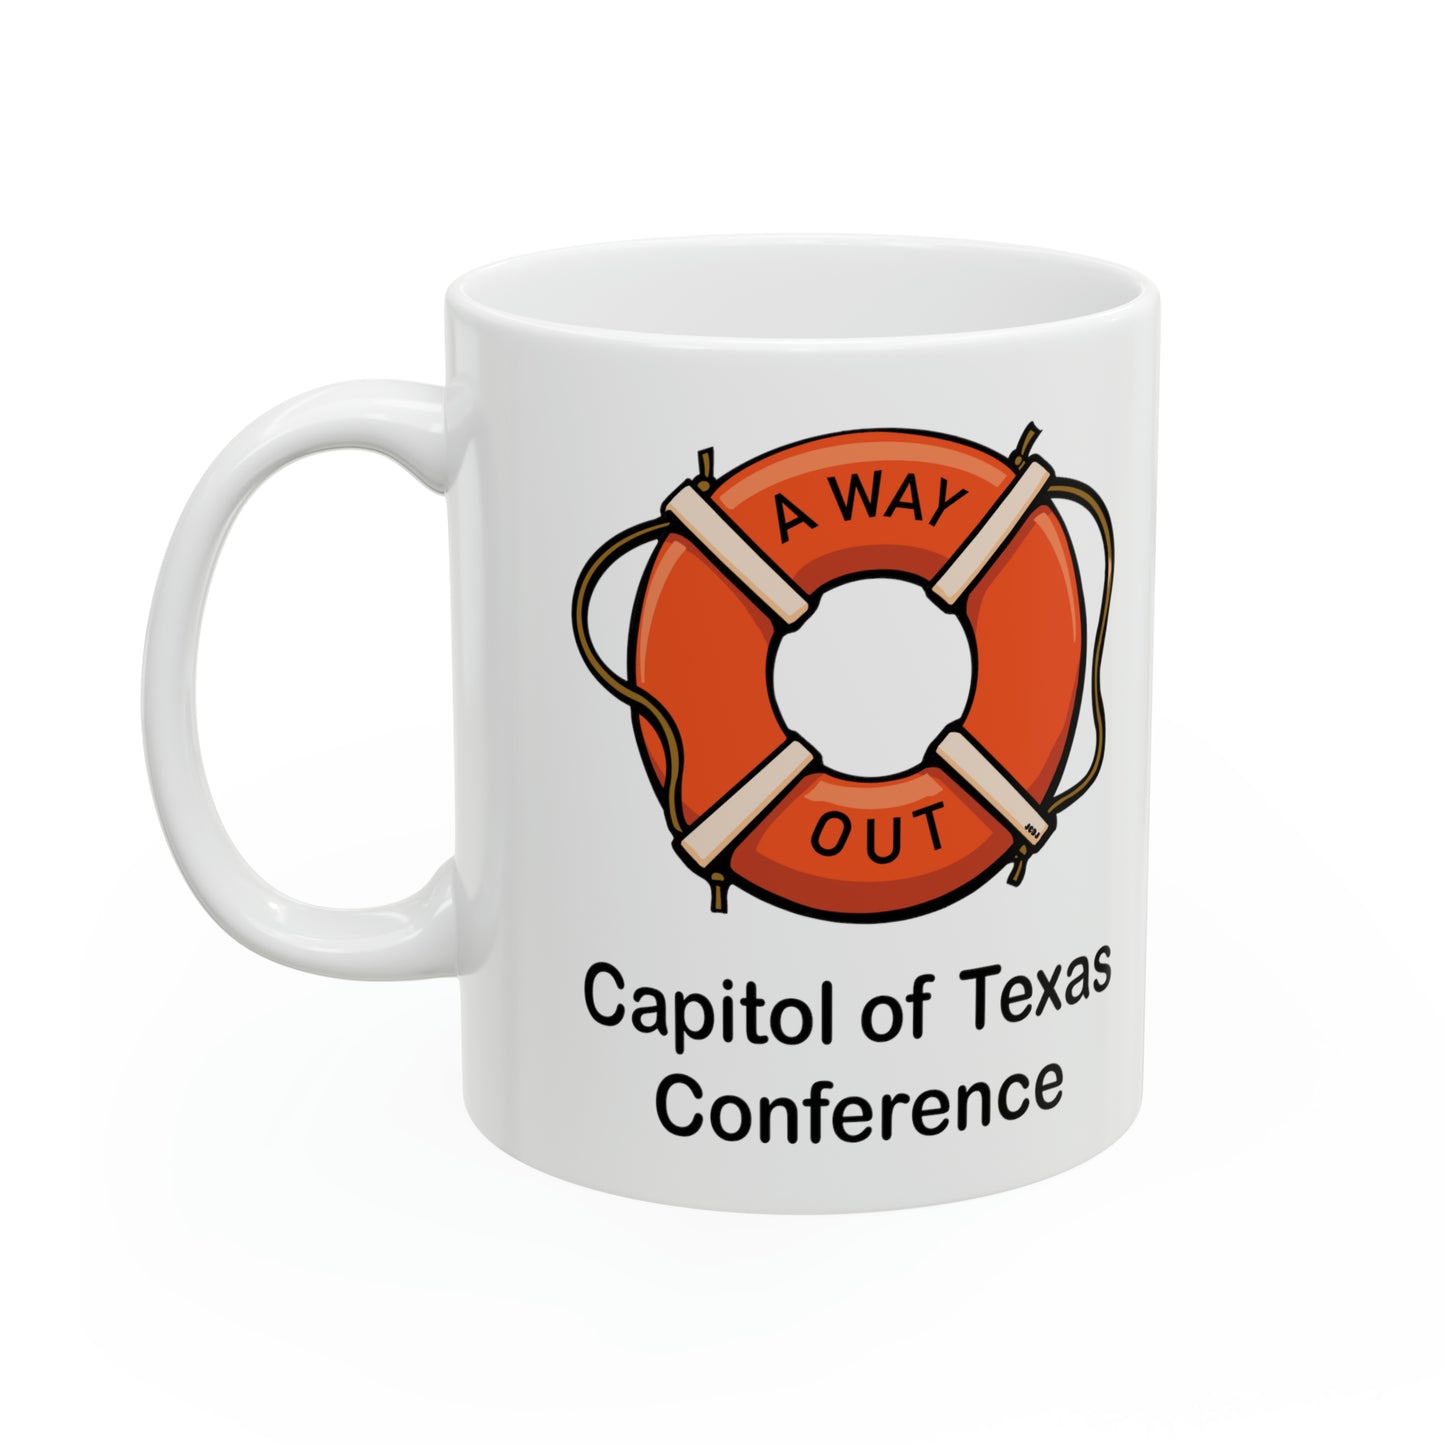 ‘A Way Out” Capitol Of Texas Conference 2024 White Ceramic Mug, 11oz